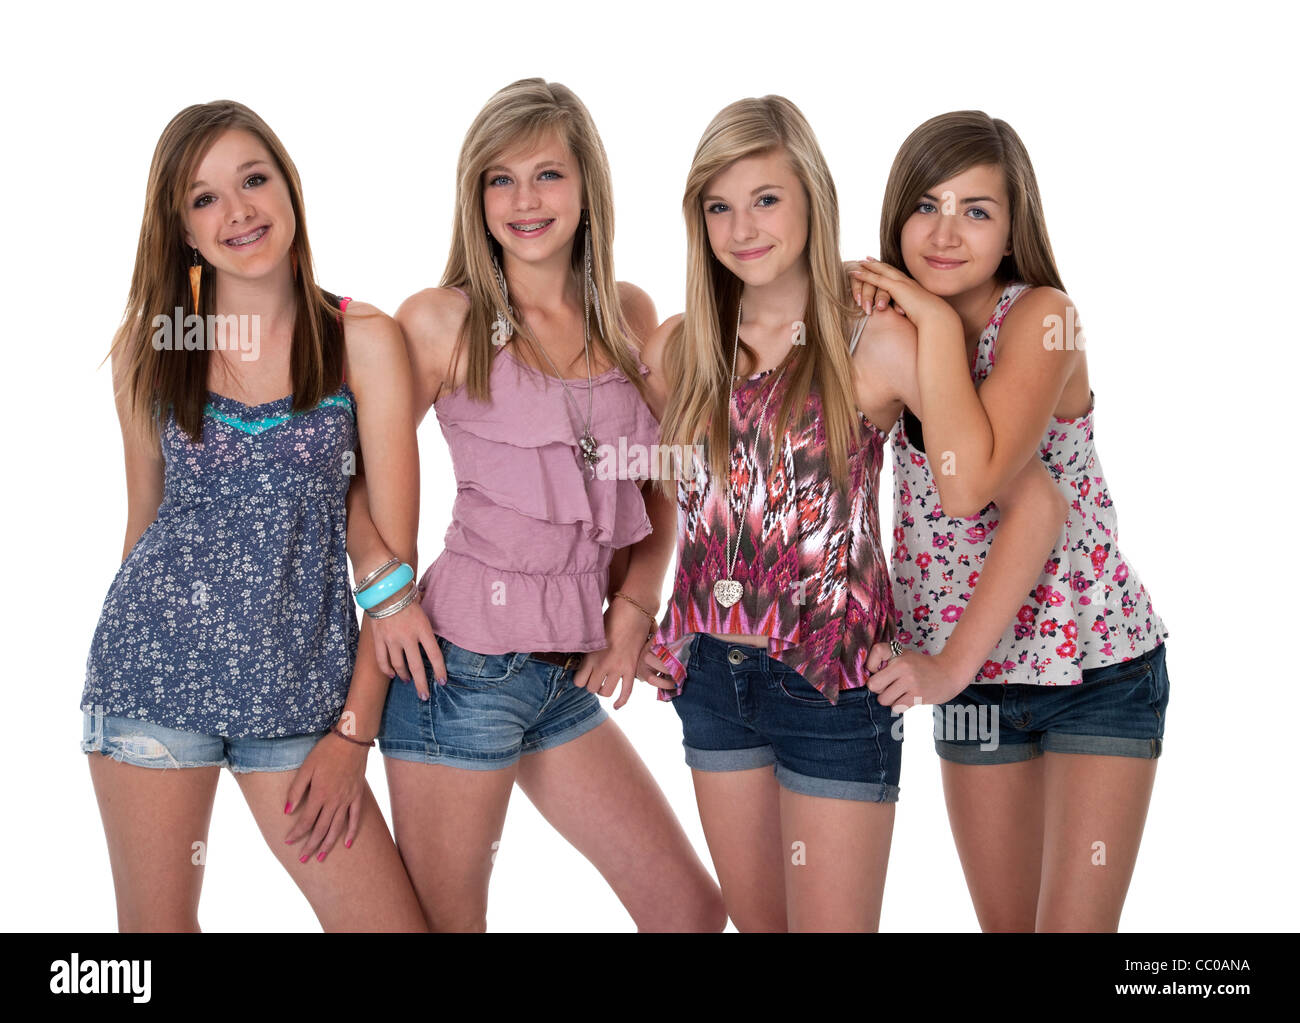 Studio photo of four pretty teenage girls in tight group on white